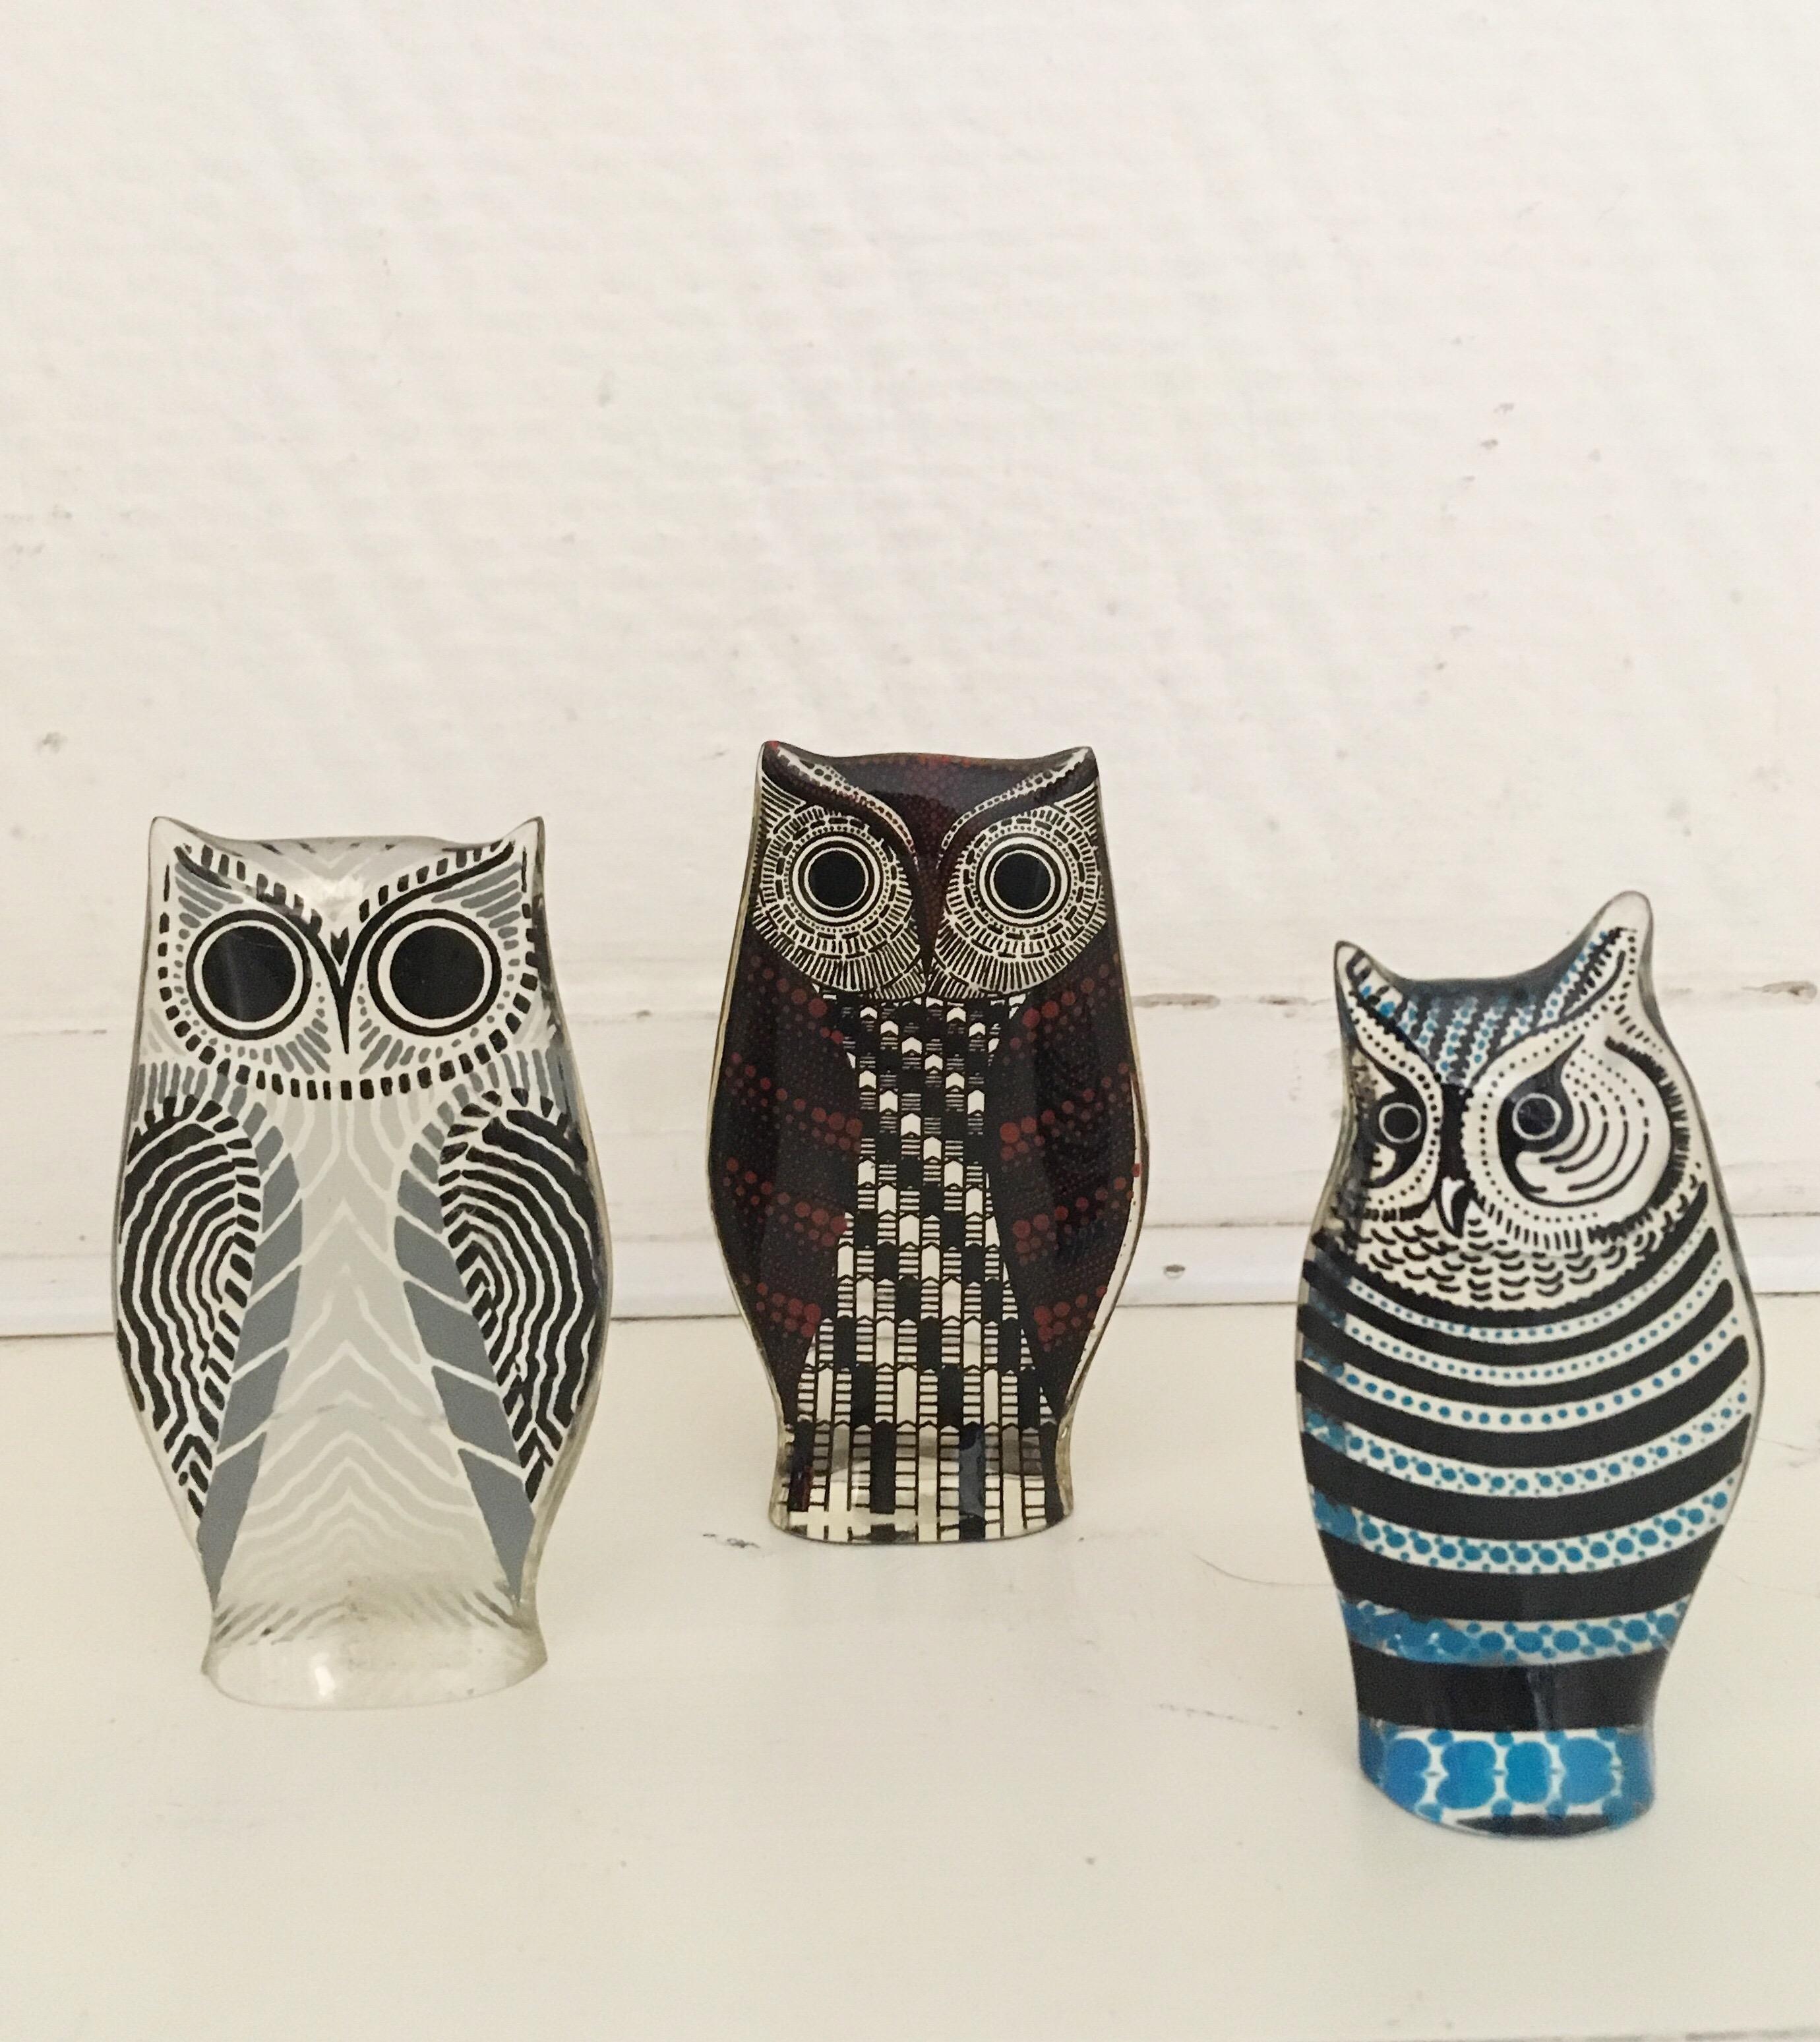 Wonderful set of three Lucite owls, designed by the Brazilian designer Abraham Palatnik, circa 1970s. NOW TEMPORARY DISCOUNT PROMO CODE AVAILABLE, SEND MESSAGE FOR MORE INFORMATION!

Measurements owls:
Red: H 9 x W 5 x D 1.7 cm
Blue: H 8 x W 4 x D 2